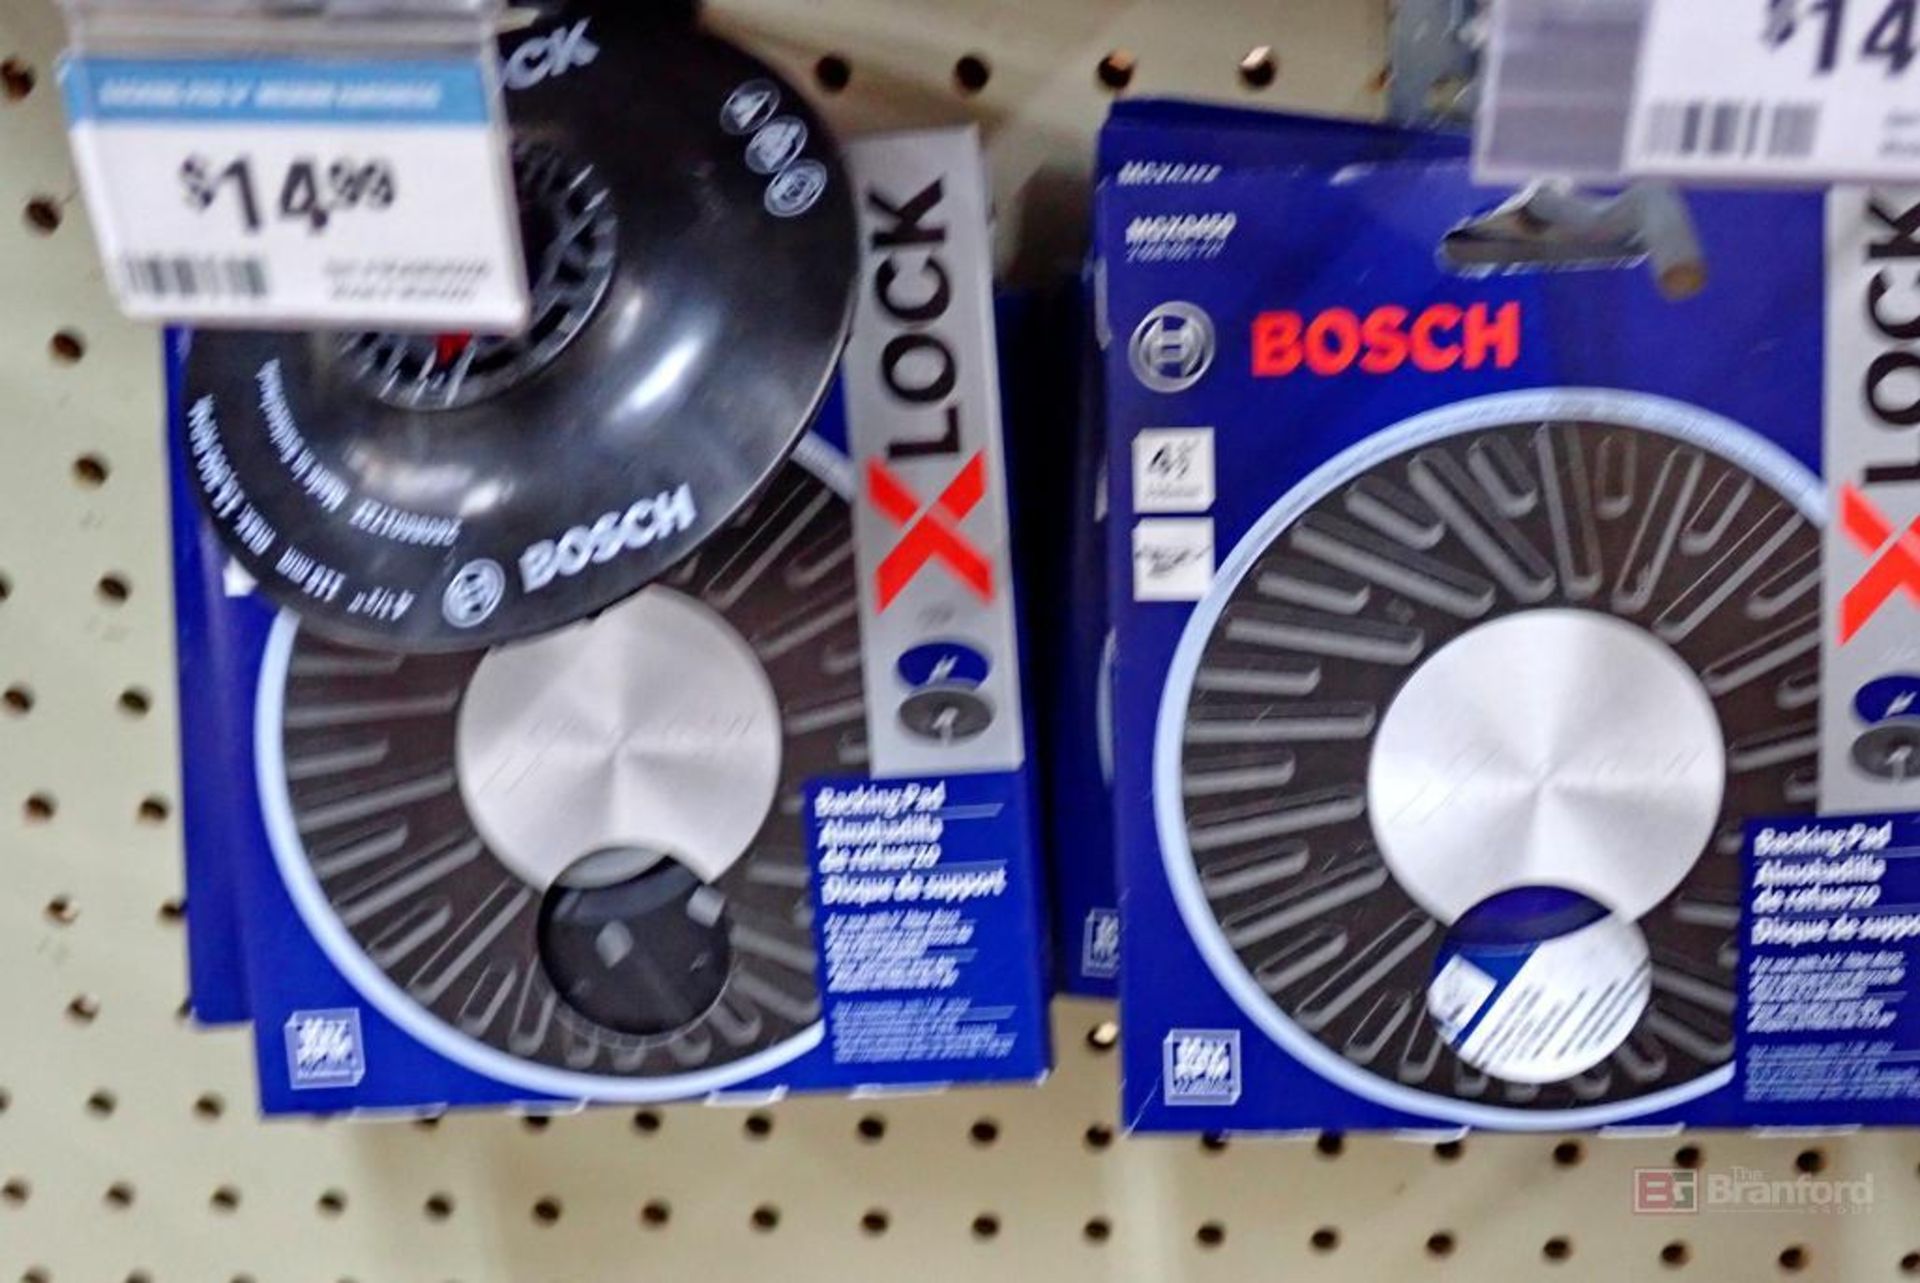 Large Assortment of Ductile, Bosch & Makita Grinding & Cutting Wheels /Disks - Image 4 of 4